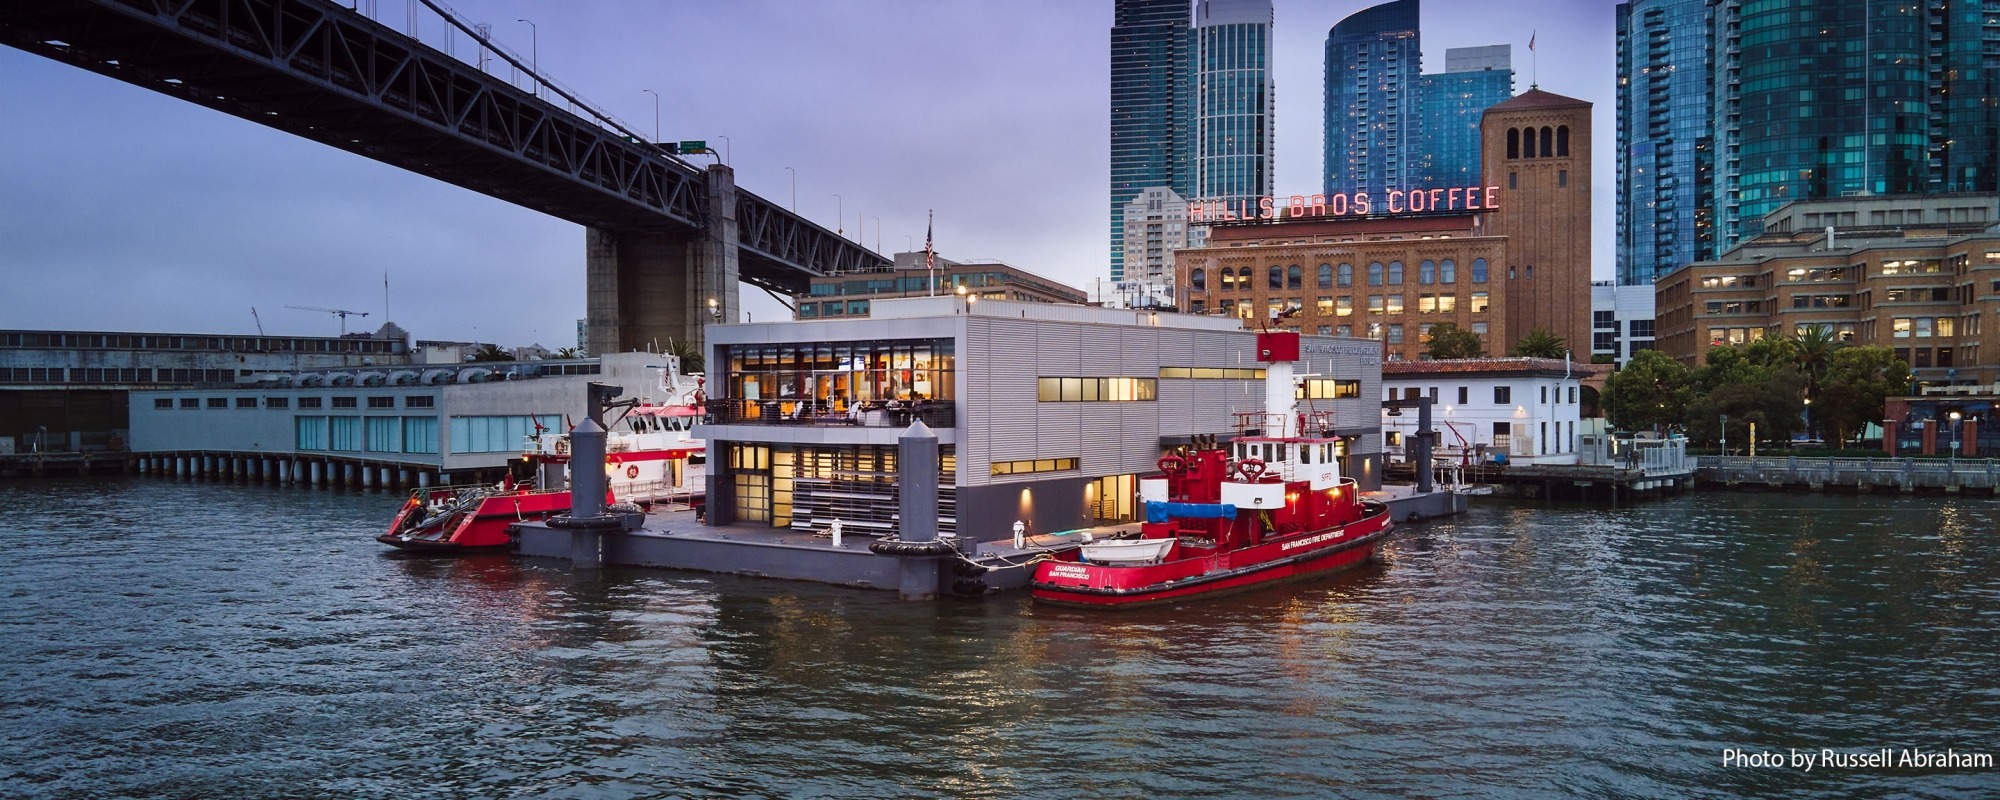 A view of Fireboat Station No. 35 against the San Francisco skyline.